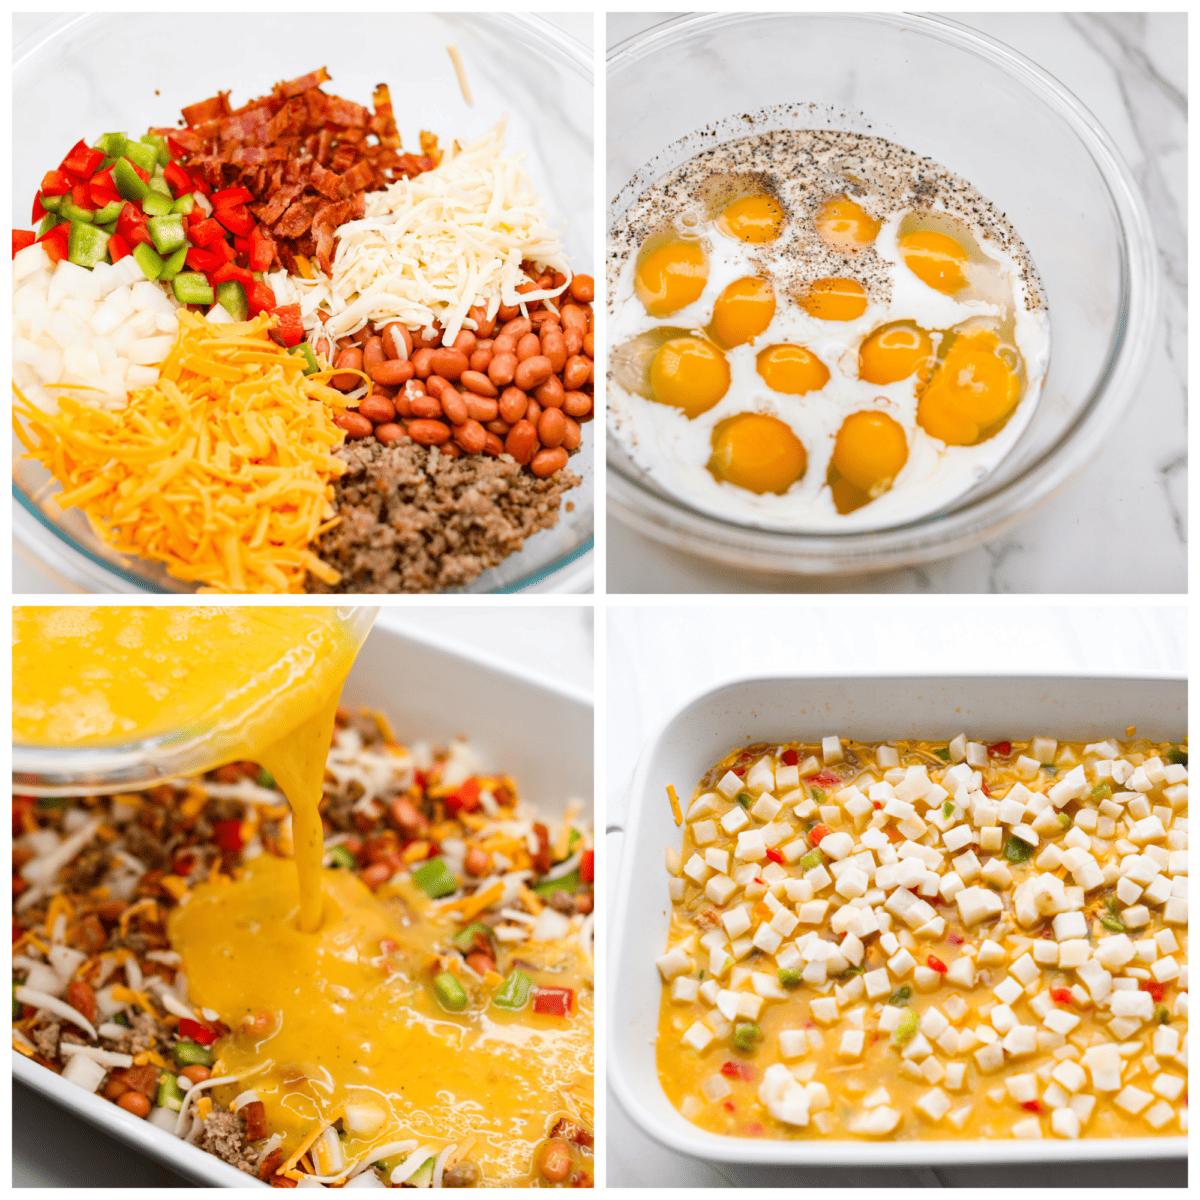 4-photo collage of the cowboy breakfast casserole ingredients being combined.